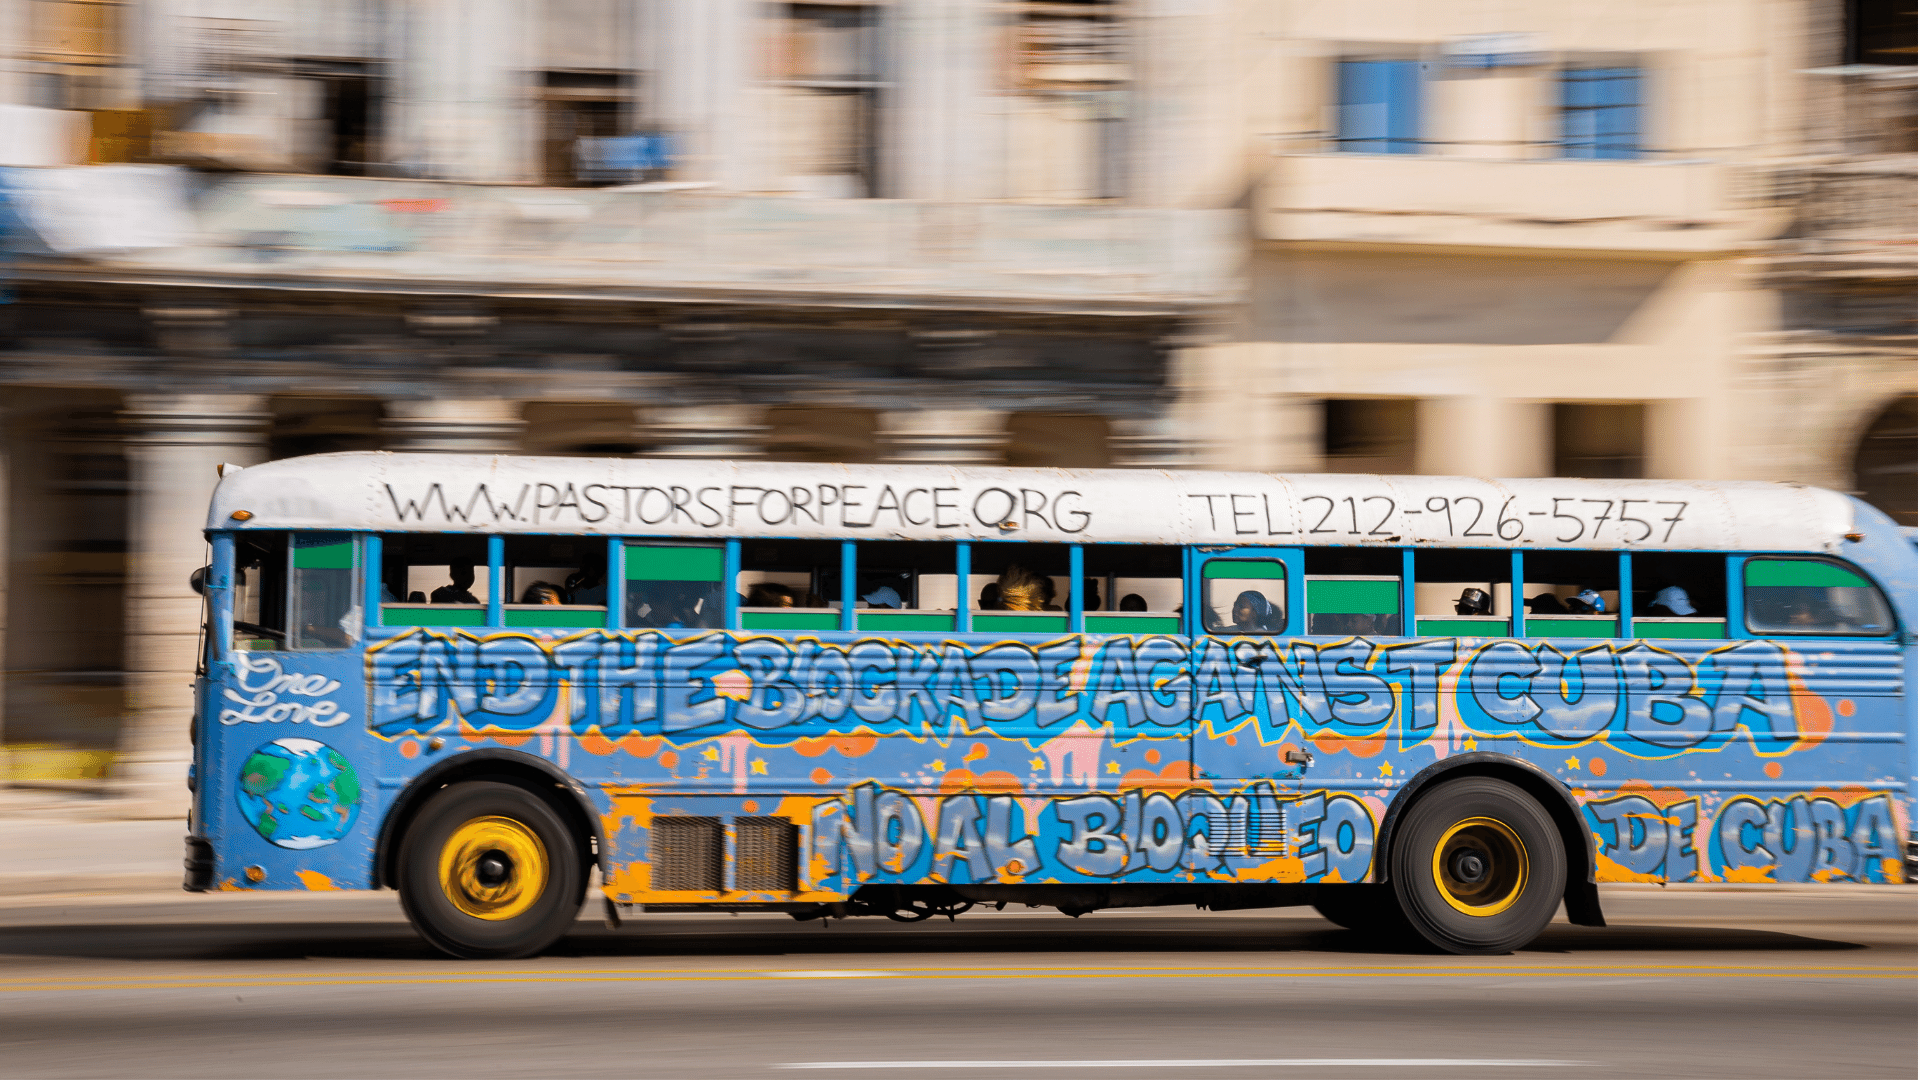 Important things to know before you visit Cuba - How to rtavel to different destinations around Cuba